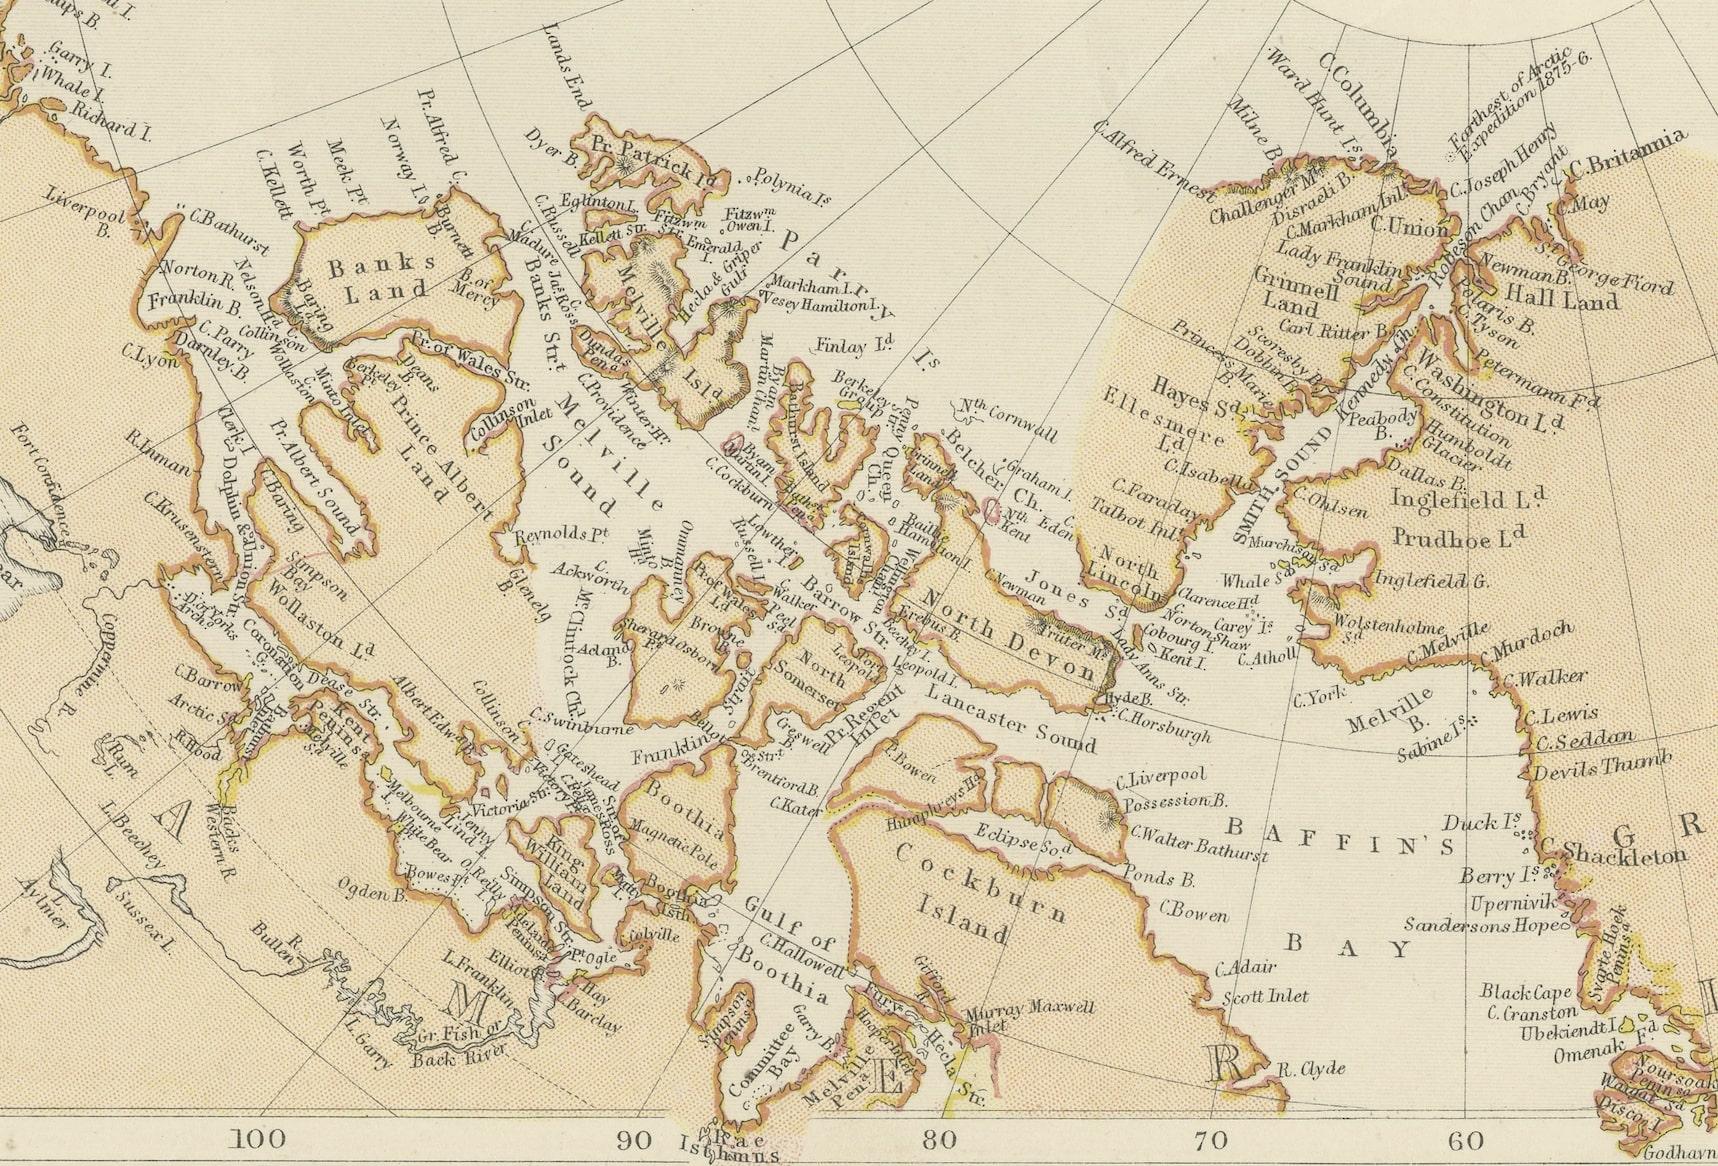 This map, extracted from the 1882 atlas by Blackie & Son, presents the North Circumpolar Regions in a projection centered on the North Pole, offering a unique view of the Arctic territories. The map's radial lines emanate from the pole, focusing on